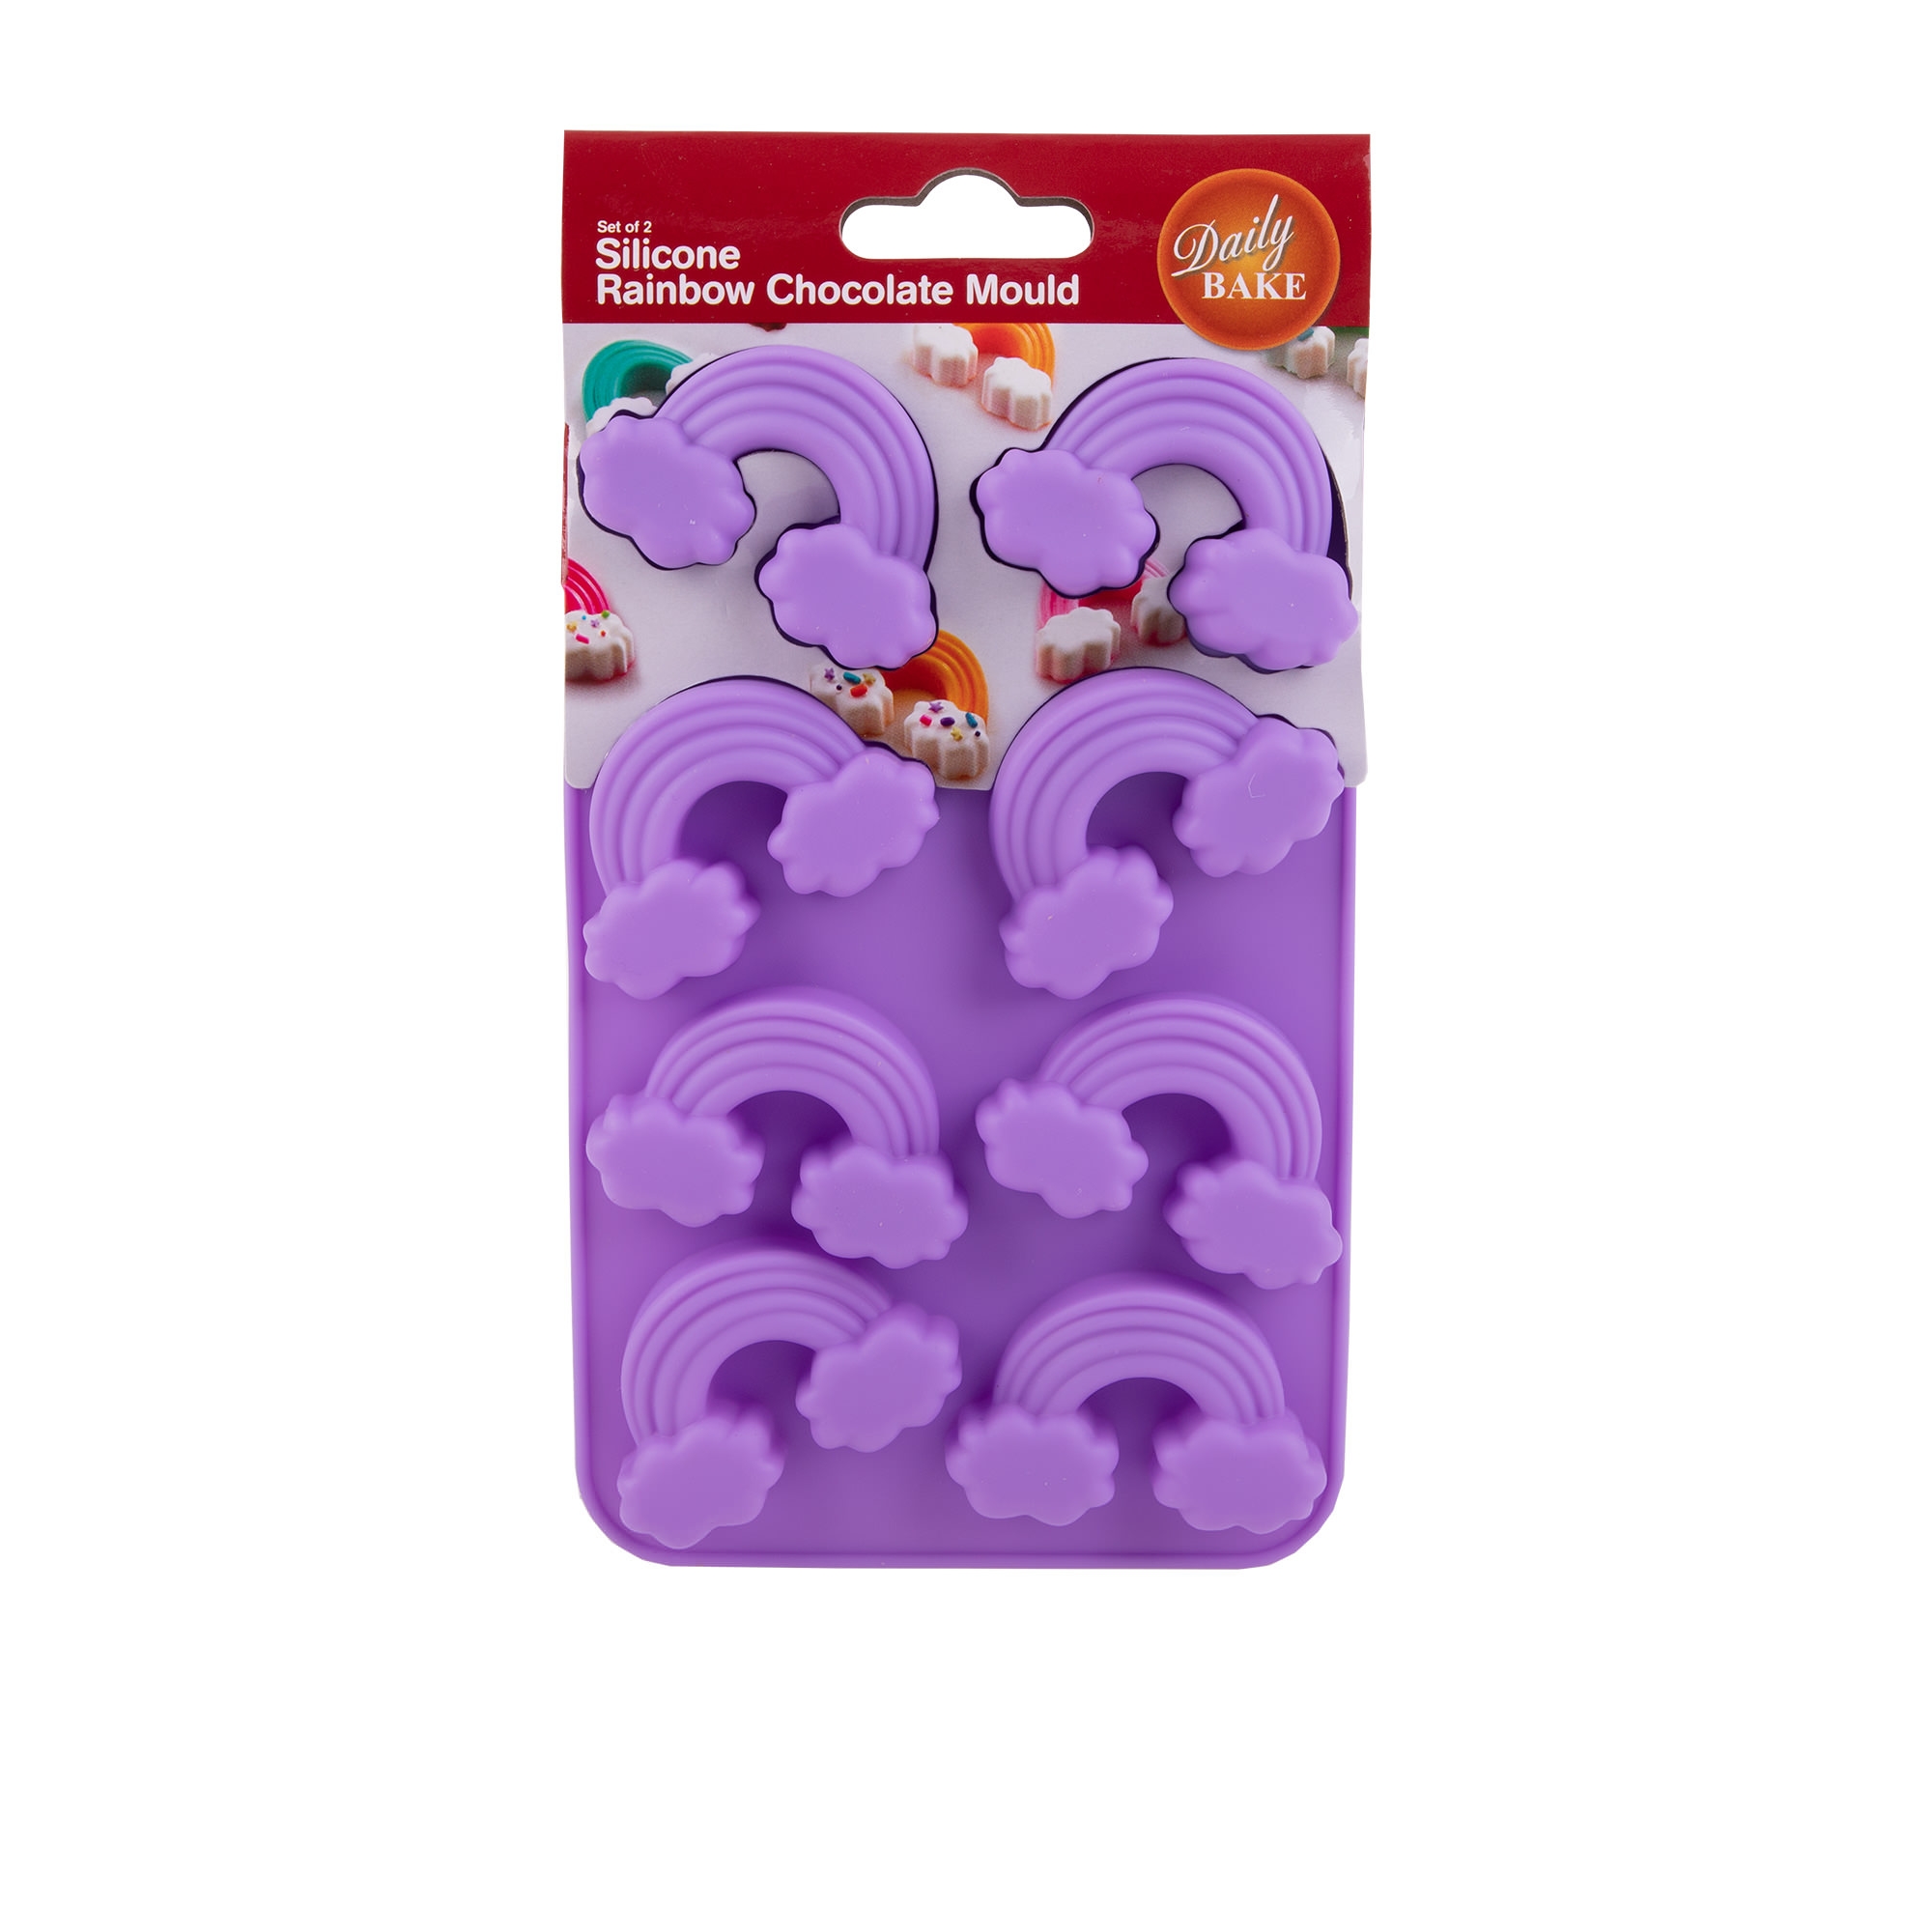 Daily Bake Rainbow Chocolate Mould 8 Cup Set 2pc Purple Image 2